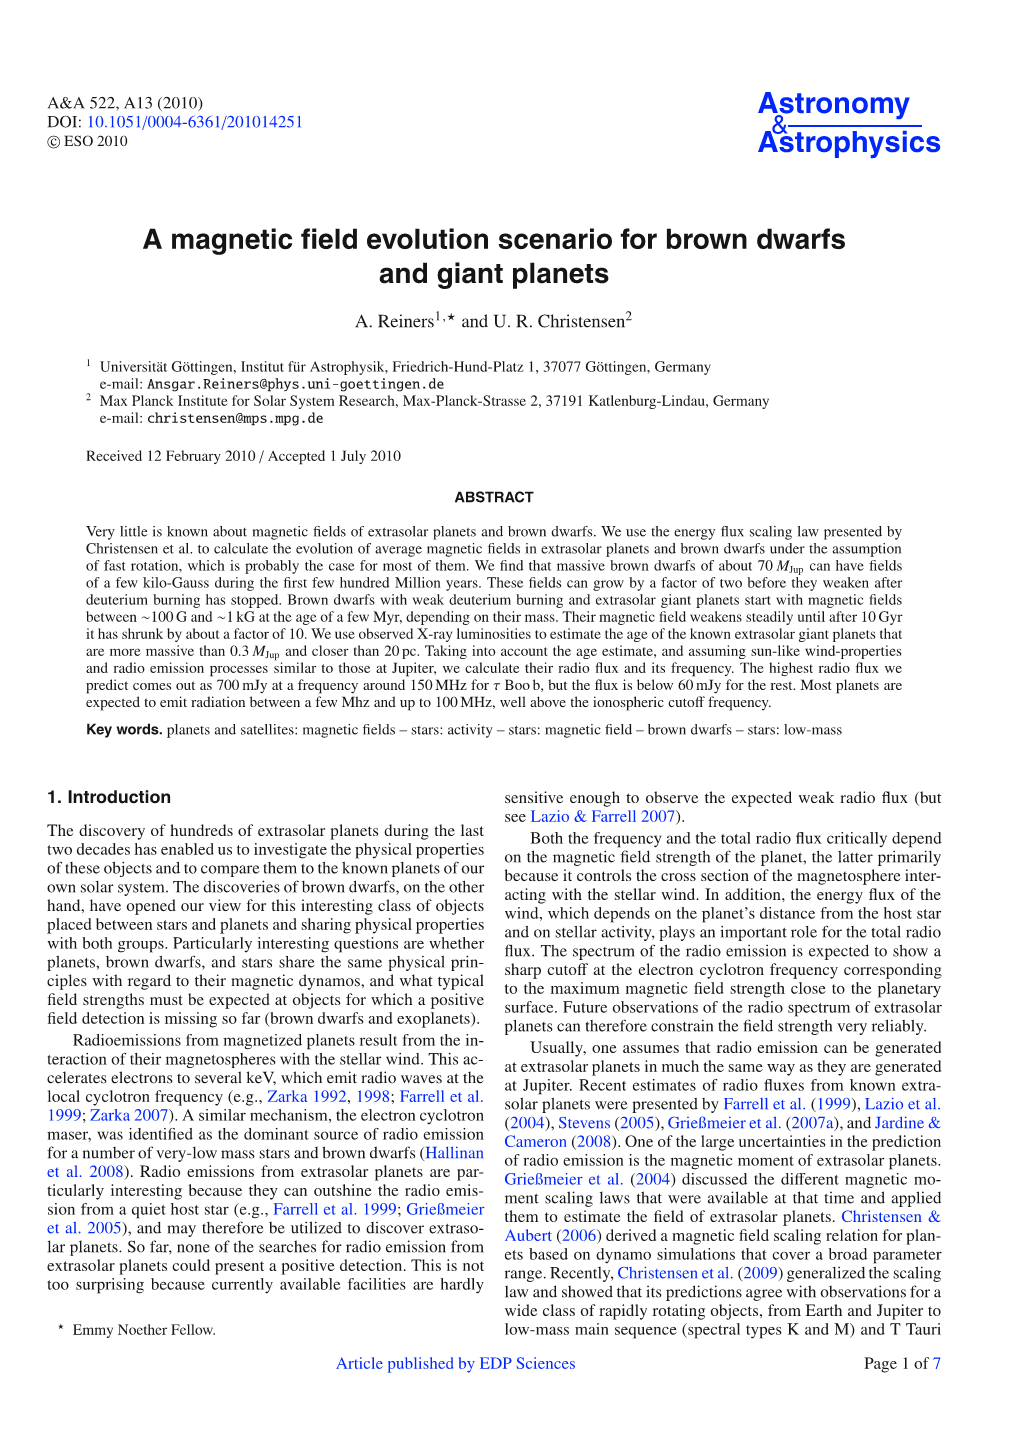 A Magnetic Field Evolution Scenario for Brown Dwarfs and Giant Planets